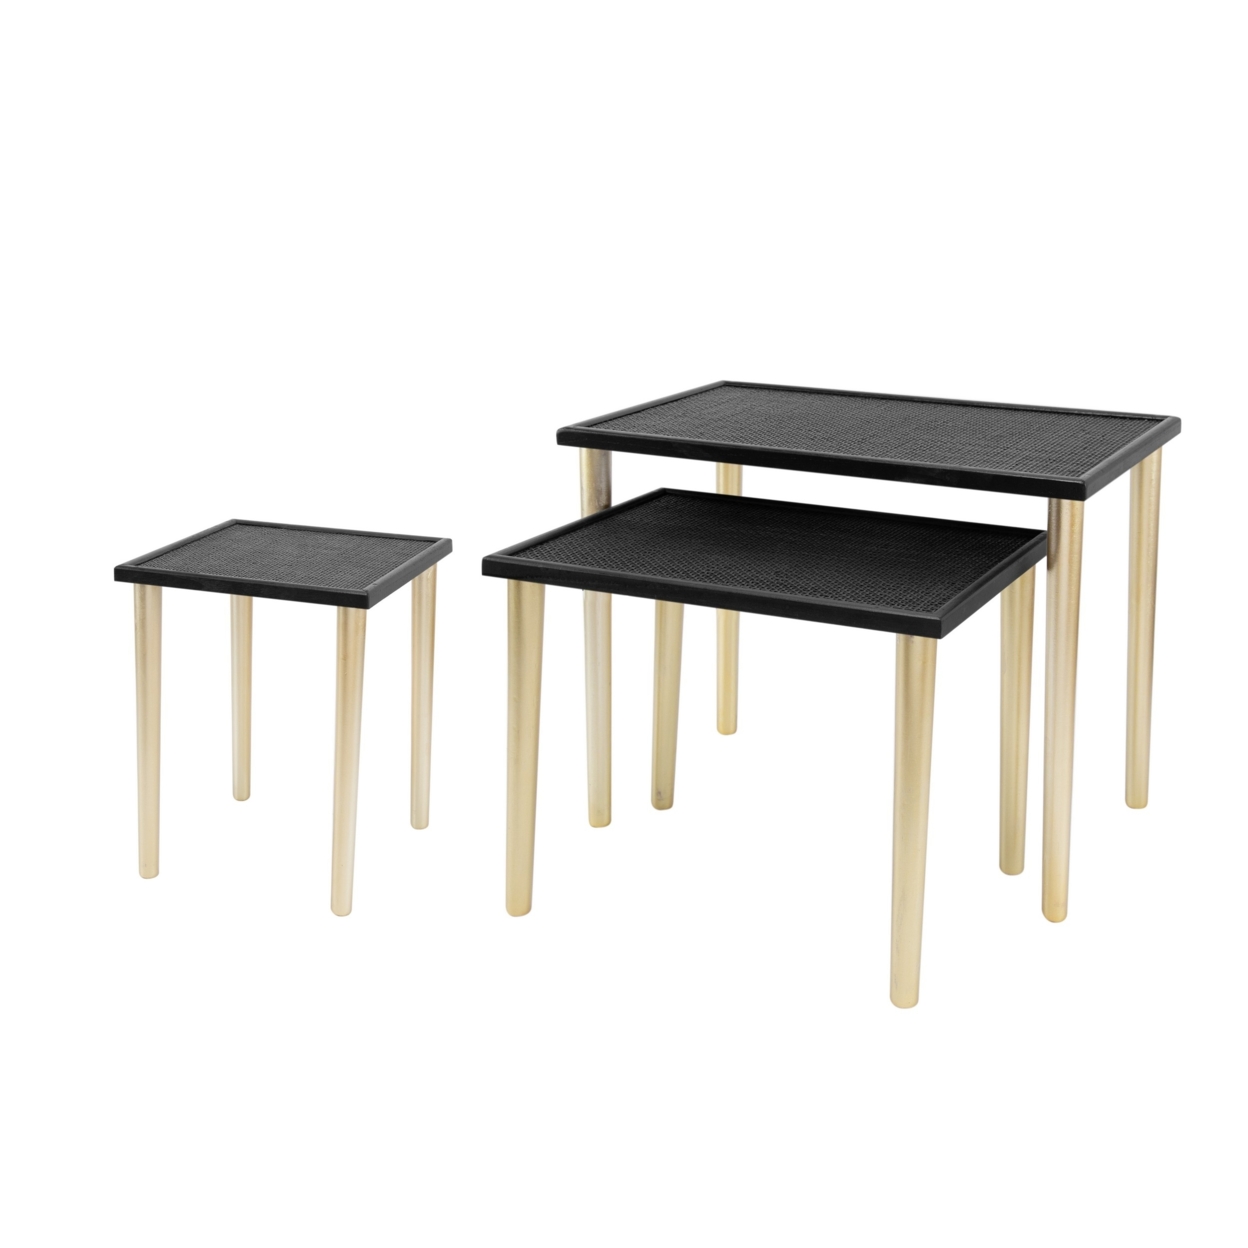 17, 19, 21 Inch Set Of 3 Nesting Accent Tables, Pine Wood, Black And Gold- Saltoro Sherpi